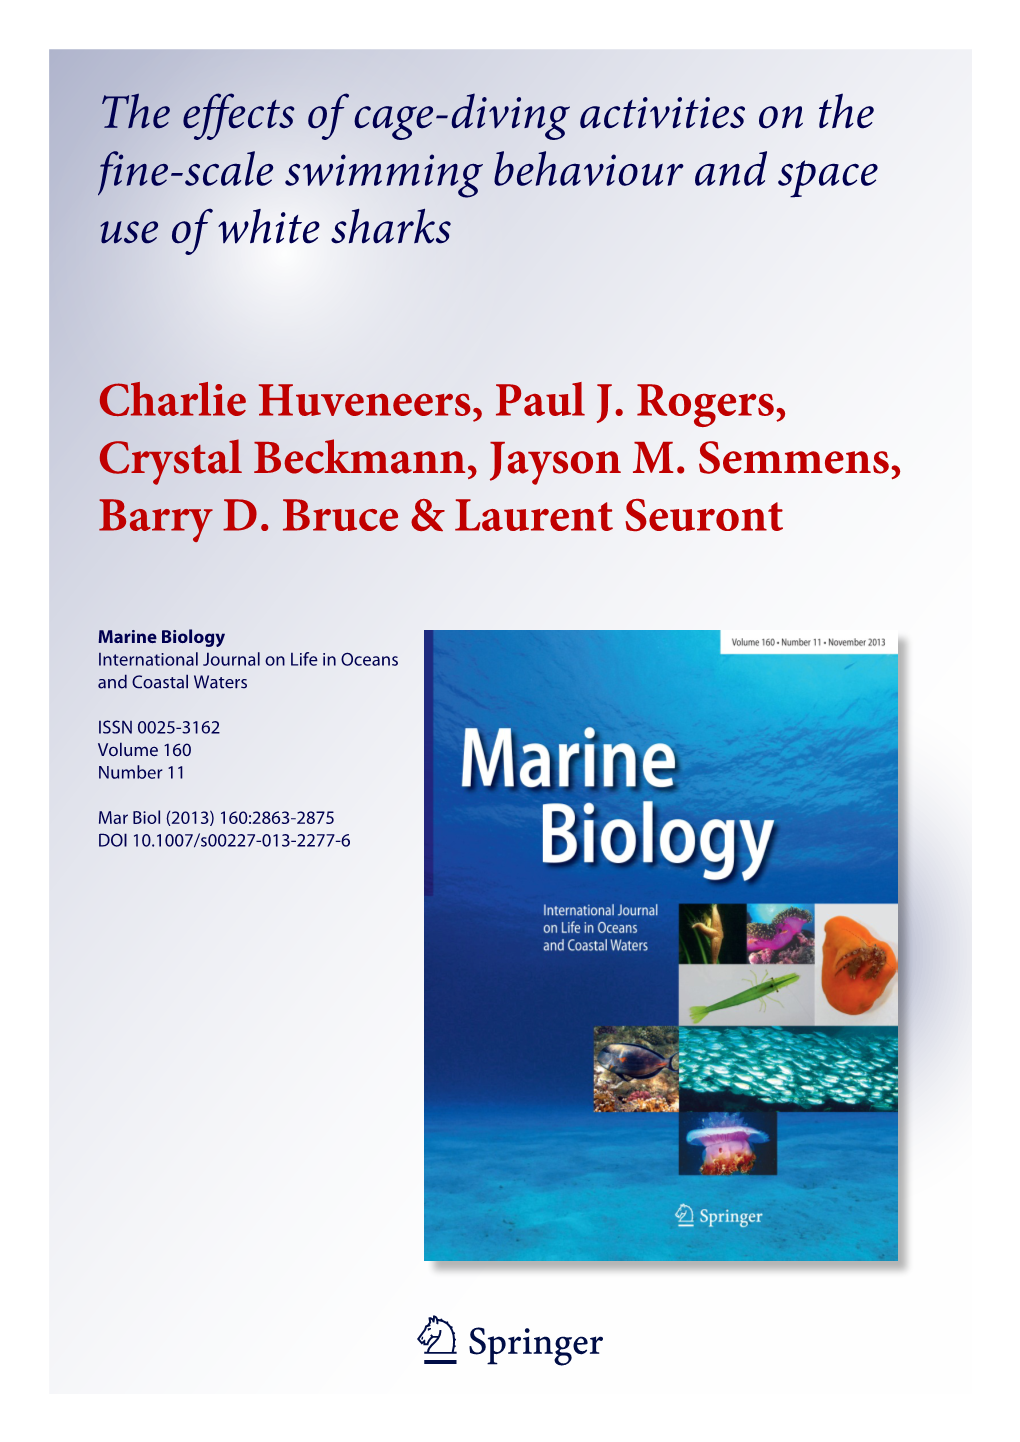 The Effects of Cage-Diving Activities on the Fine-Scale Swimming Behaviour and Space Use of White Sharks